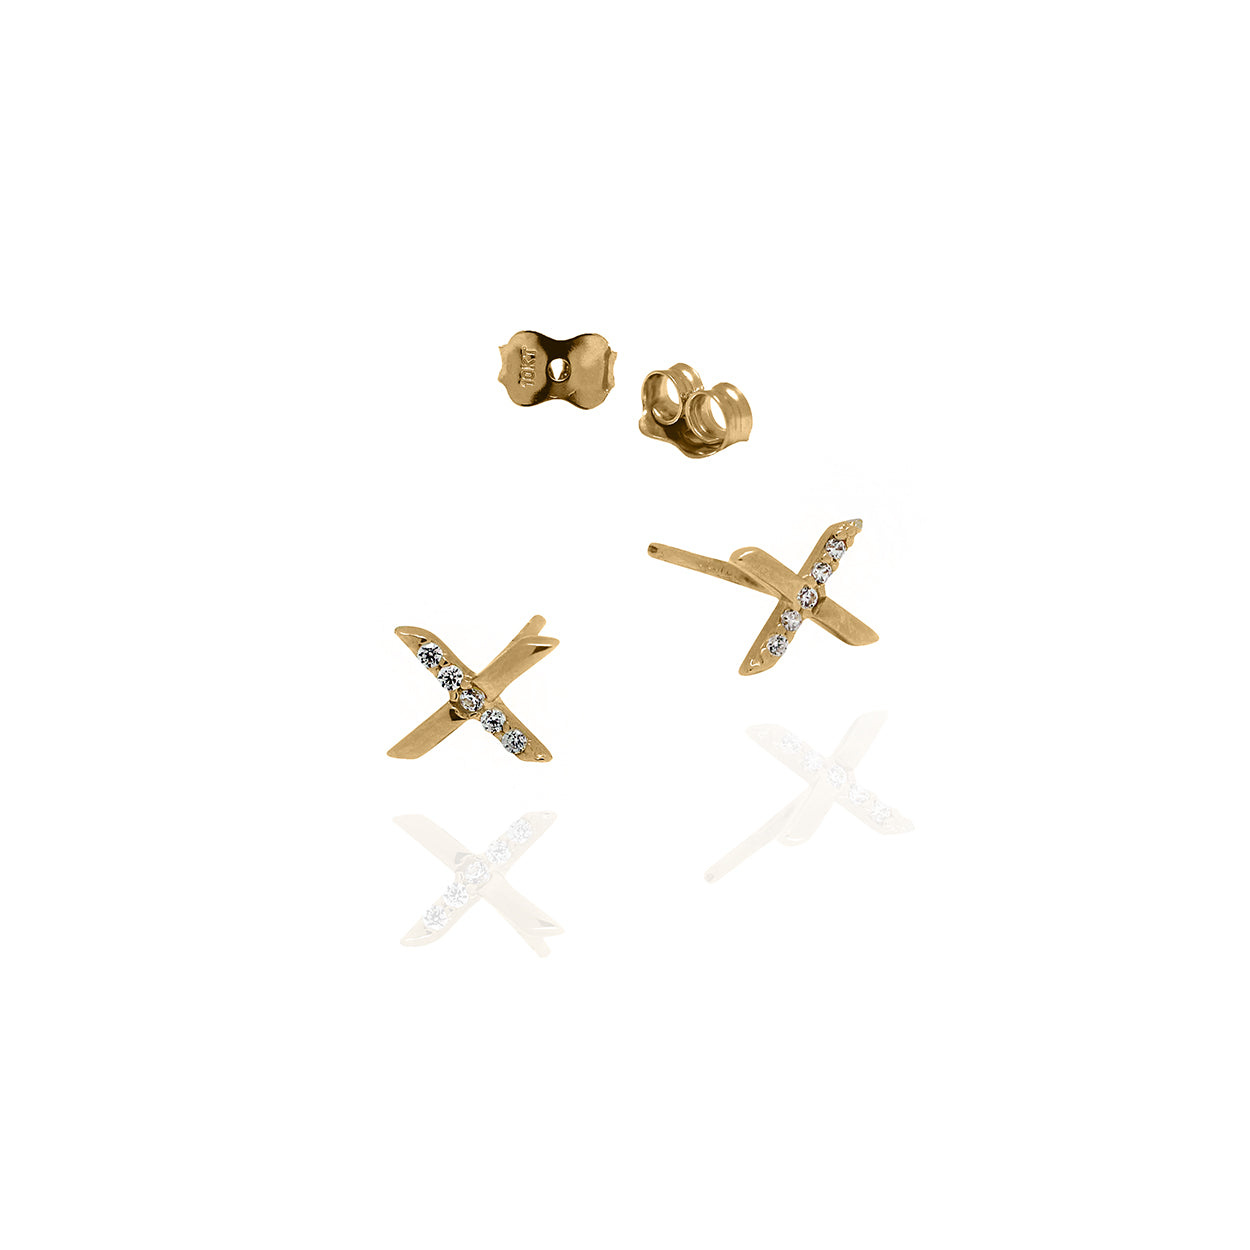 10kt Yellow Gold X style Stud Earrings set with Cubic Zirconia